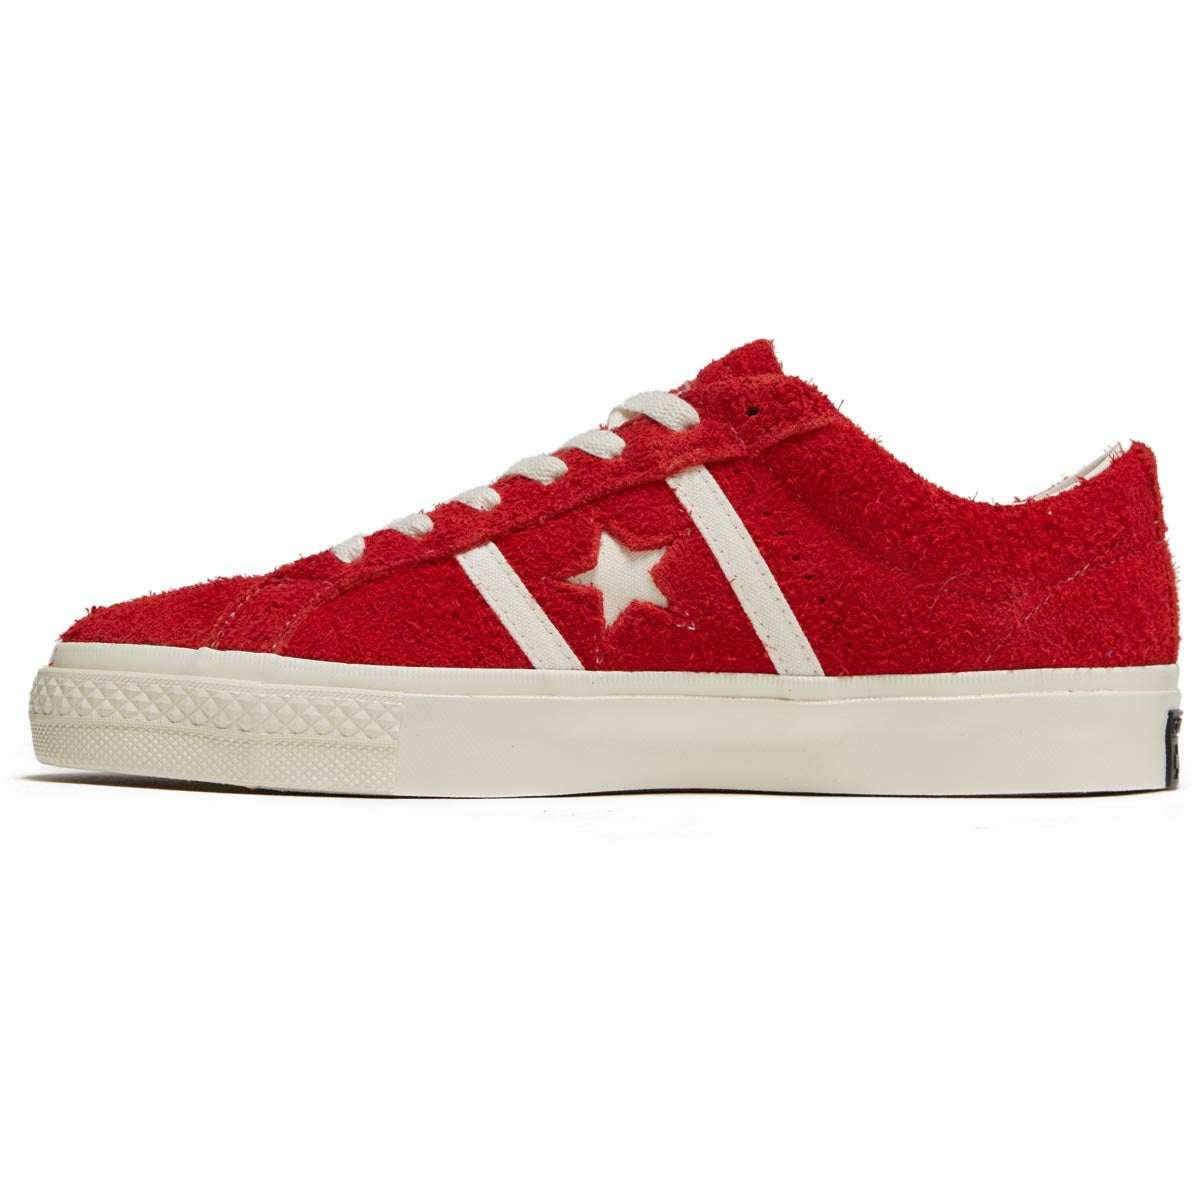 Converse One Star Academy Pro Shoes - Red/Egret/Egret image 2